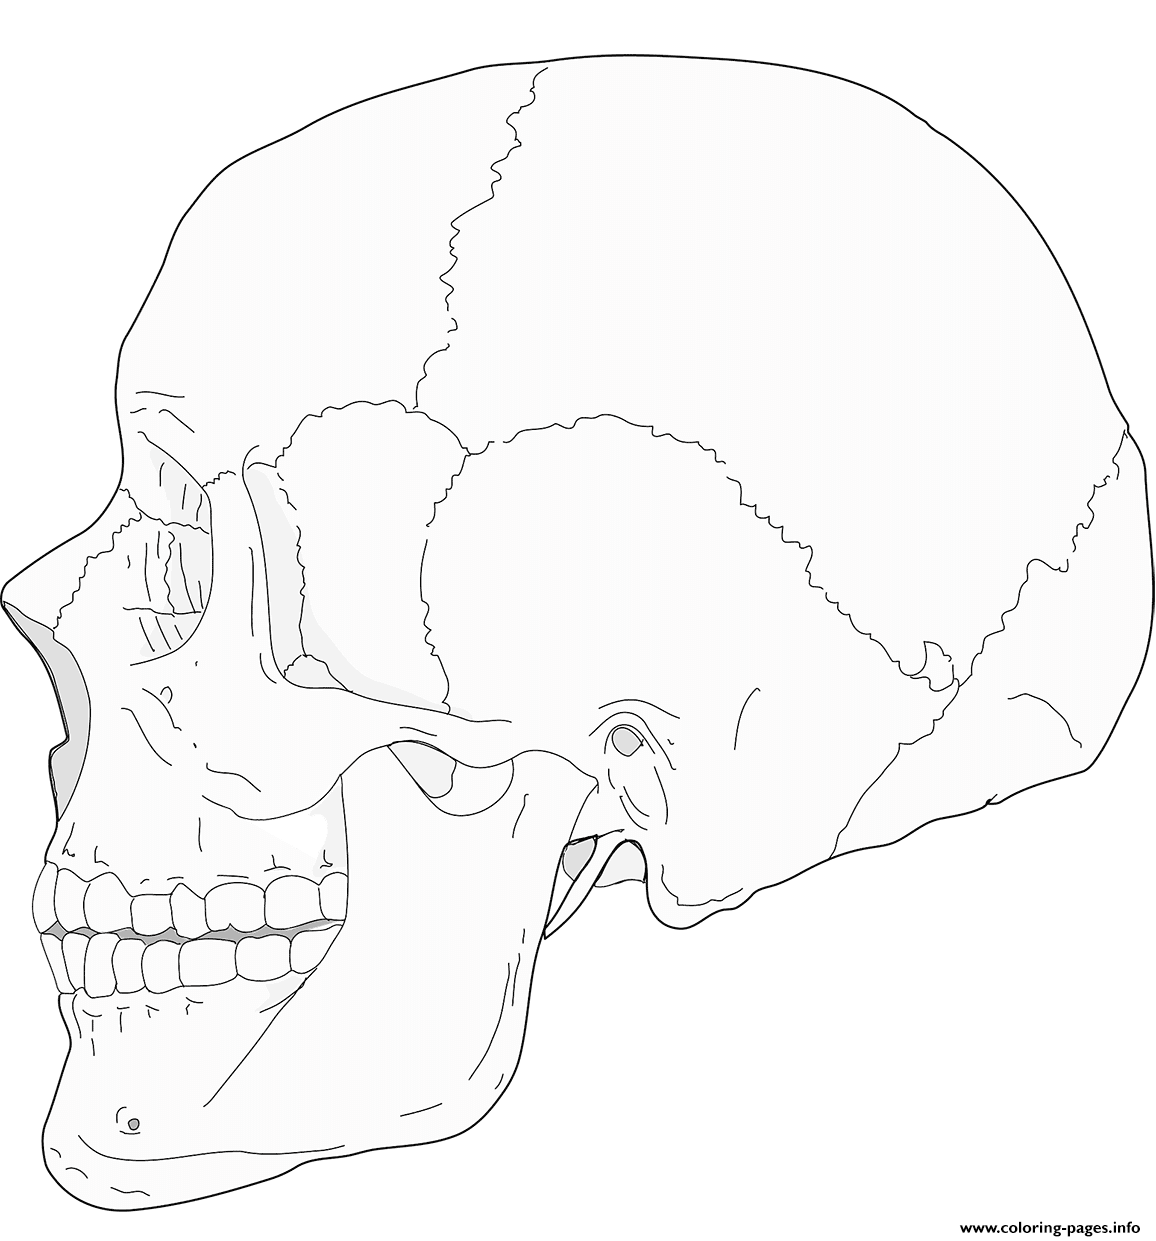 Human Skull Side View coloring